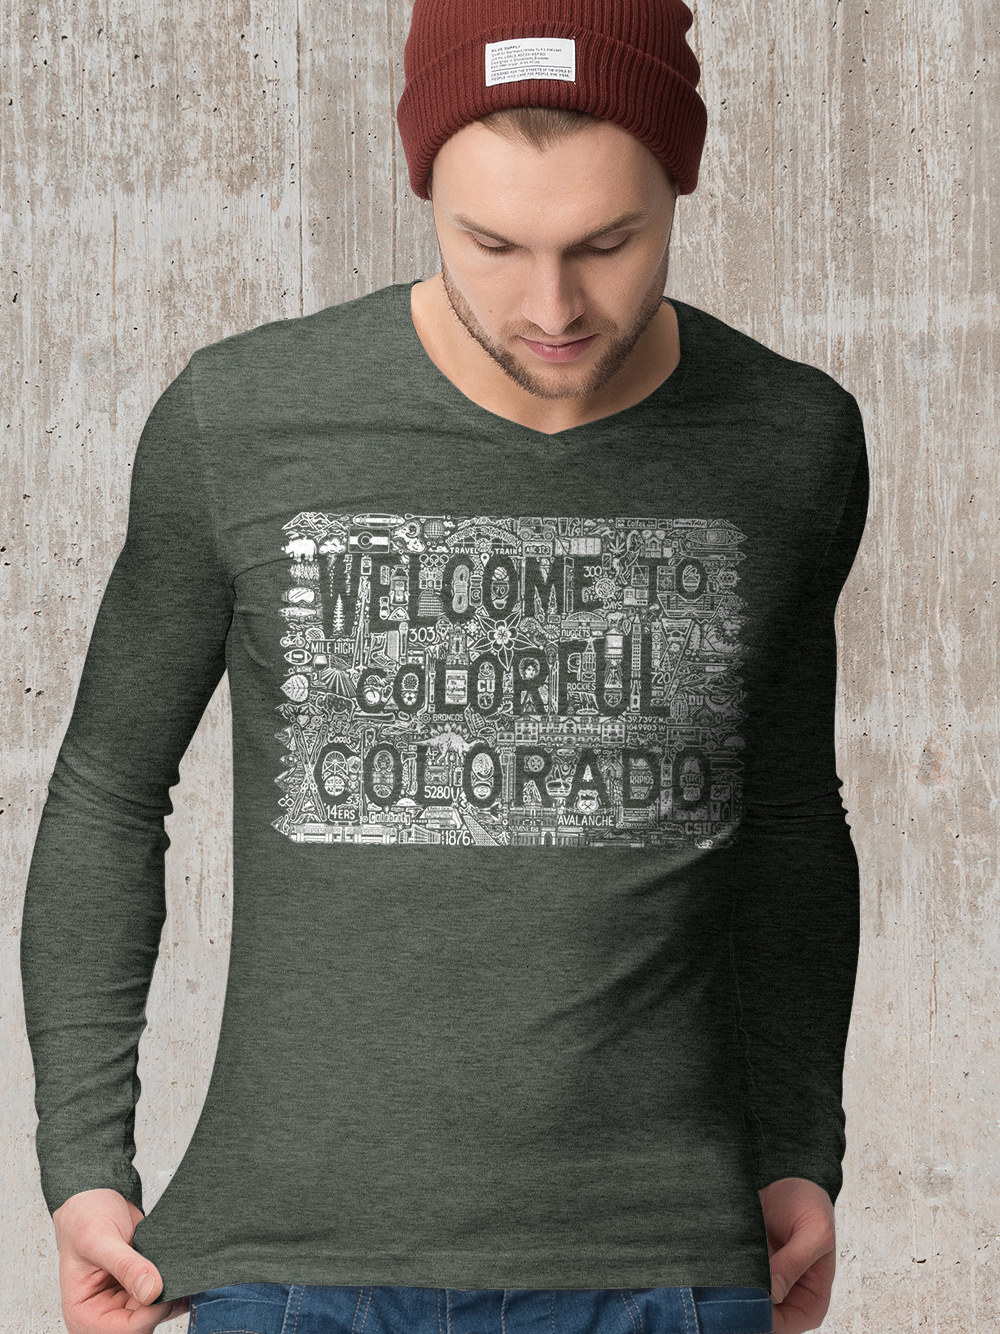 Welcome to Colorado Iconoflage Men's Shirt